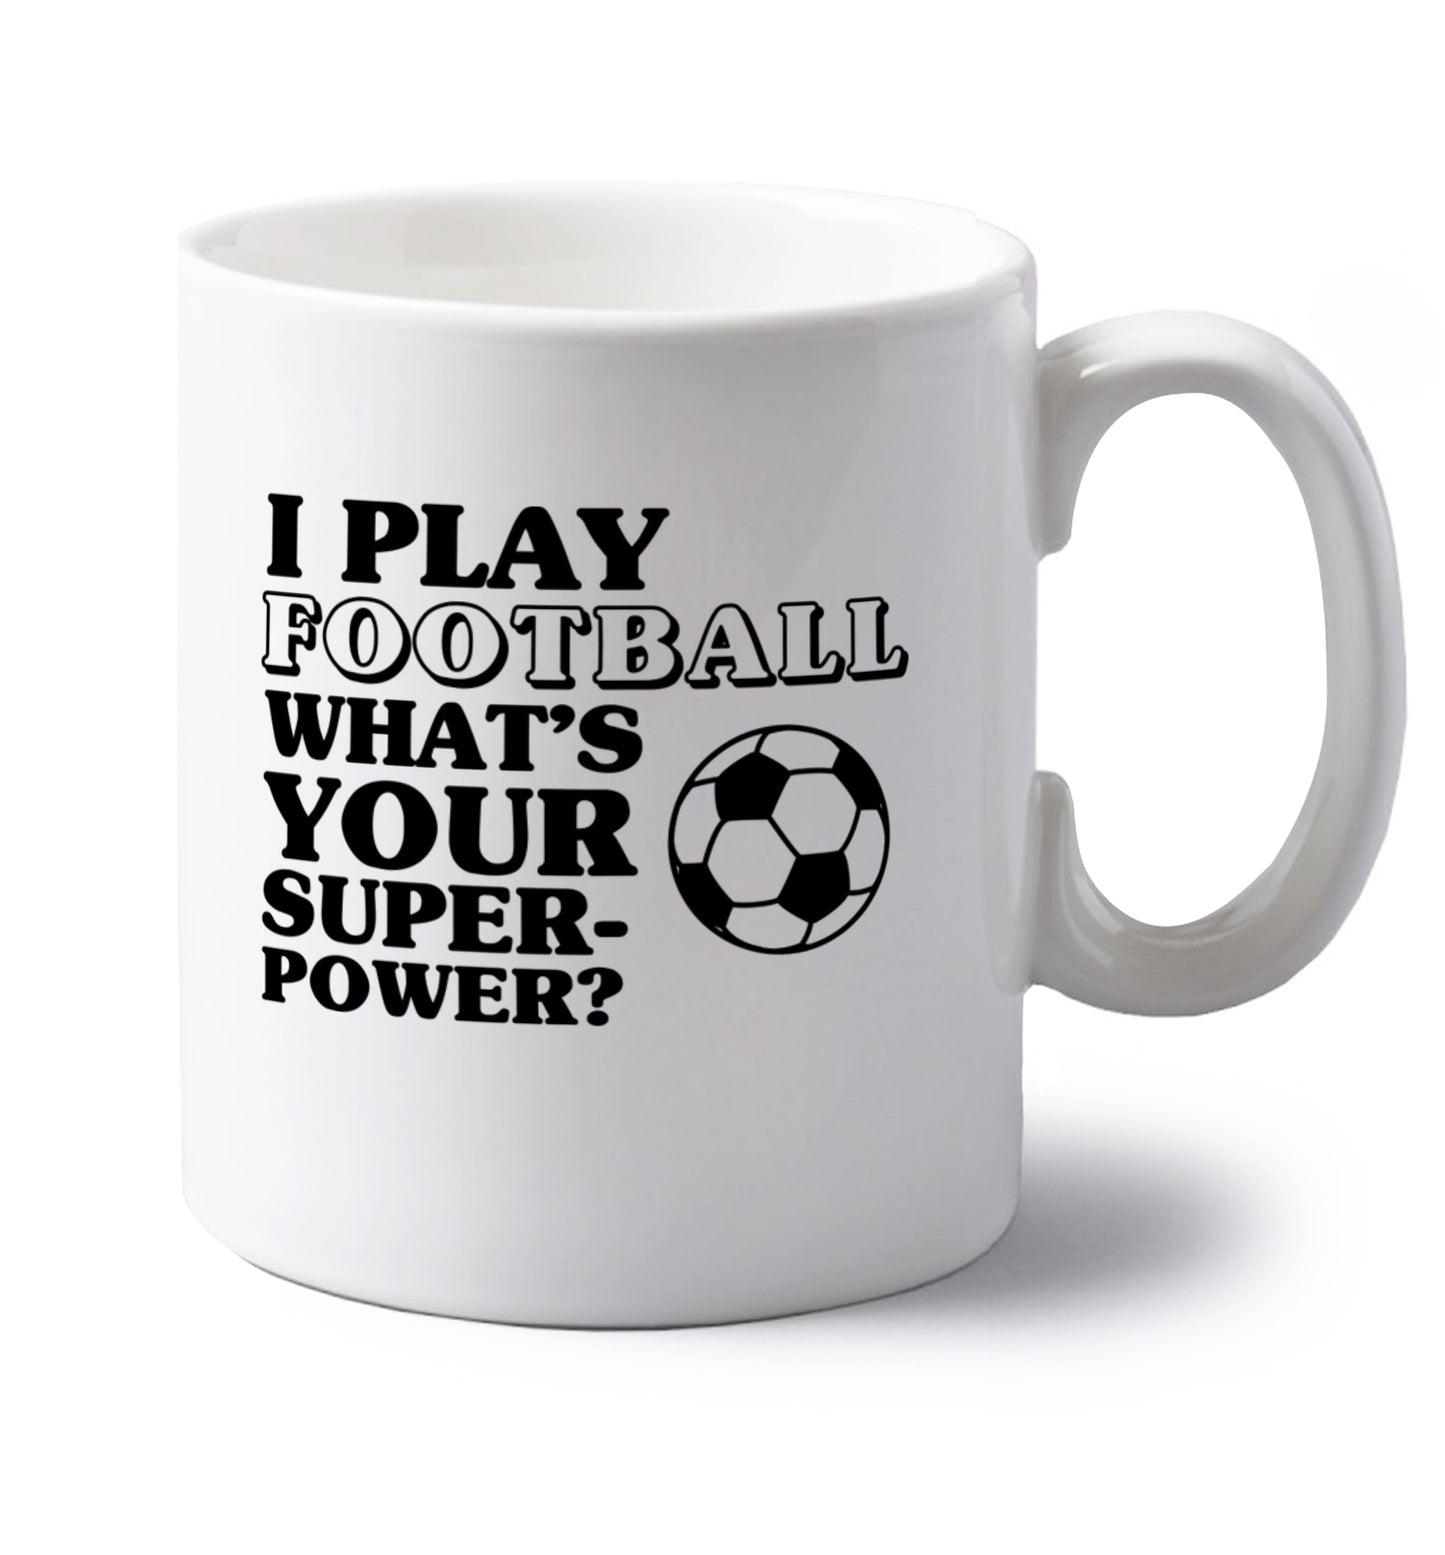 I play football what's your superpower? left handed white ceramic mug 